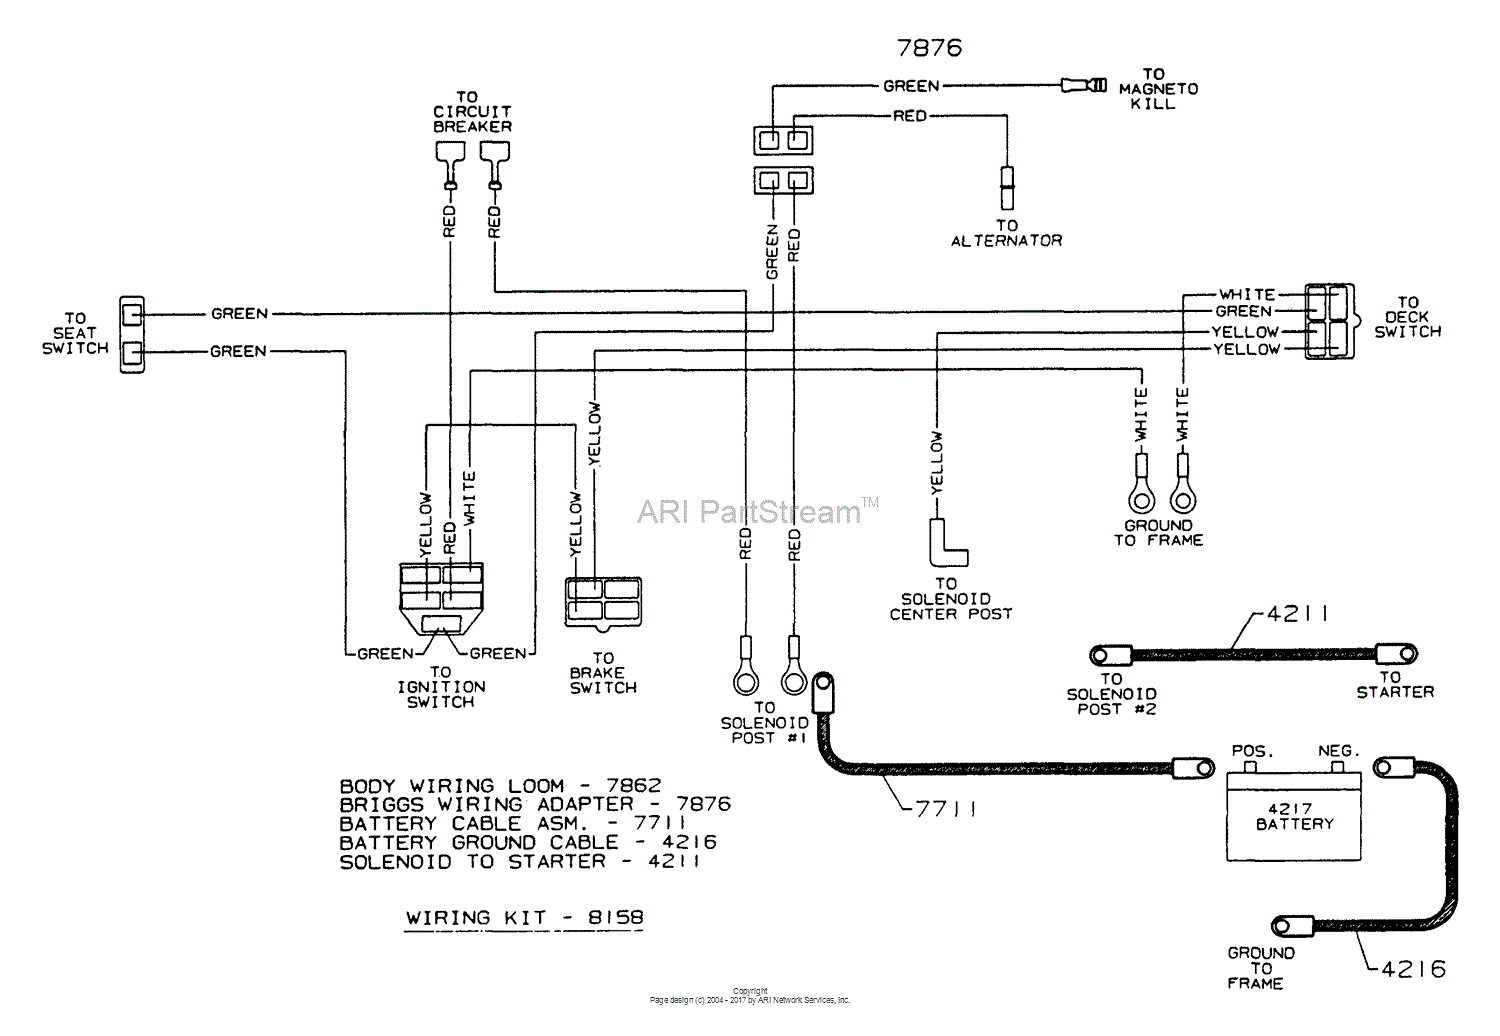 Yale Forklift Ignition Wiring Diagram Wiring Diagrams Name Name Miglioribanche It